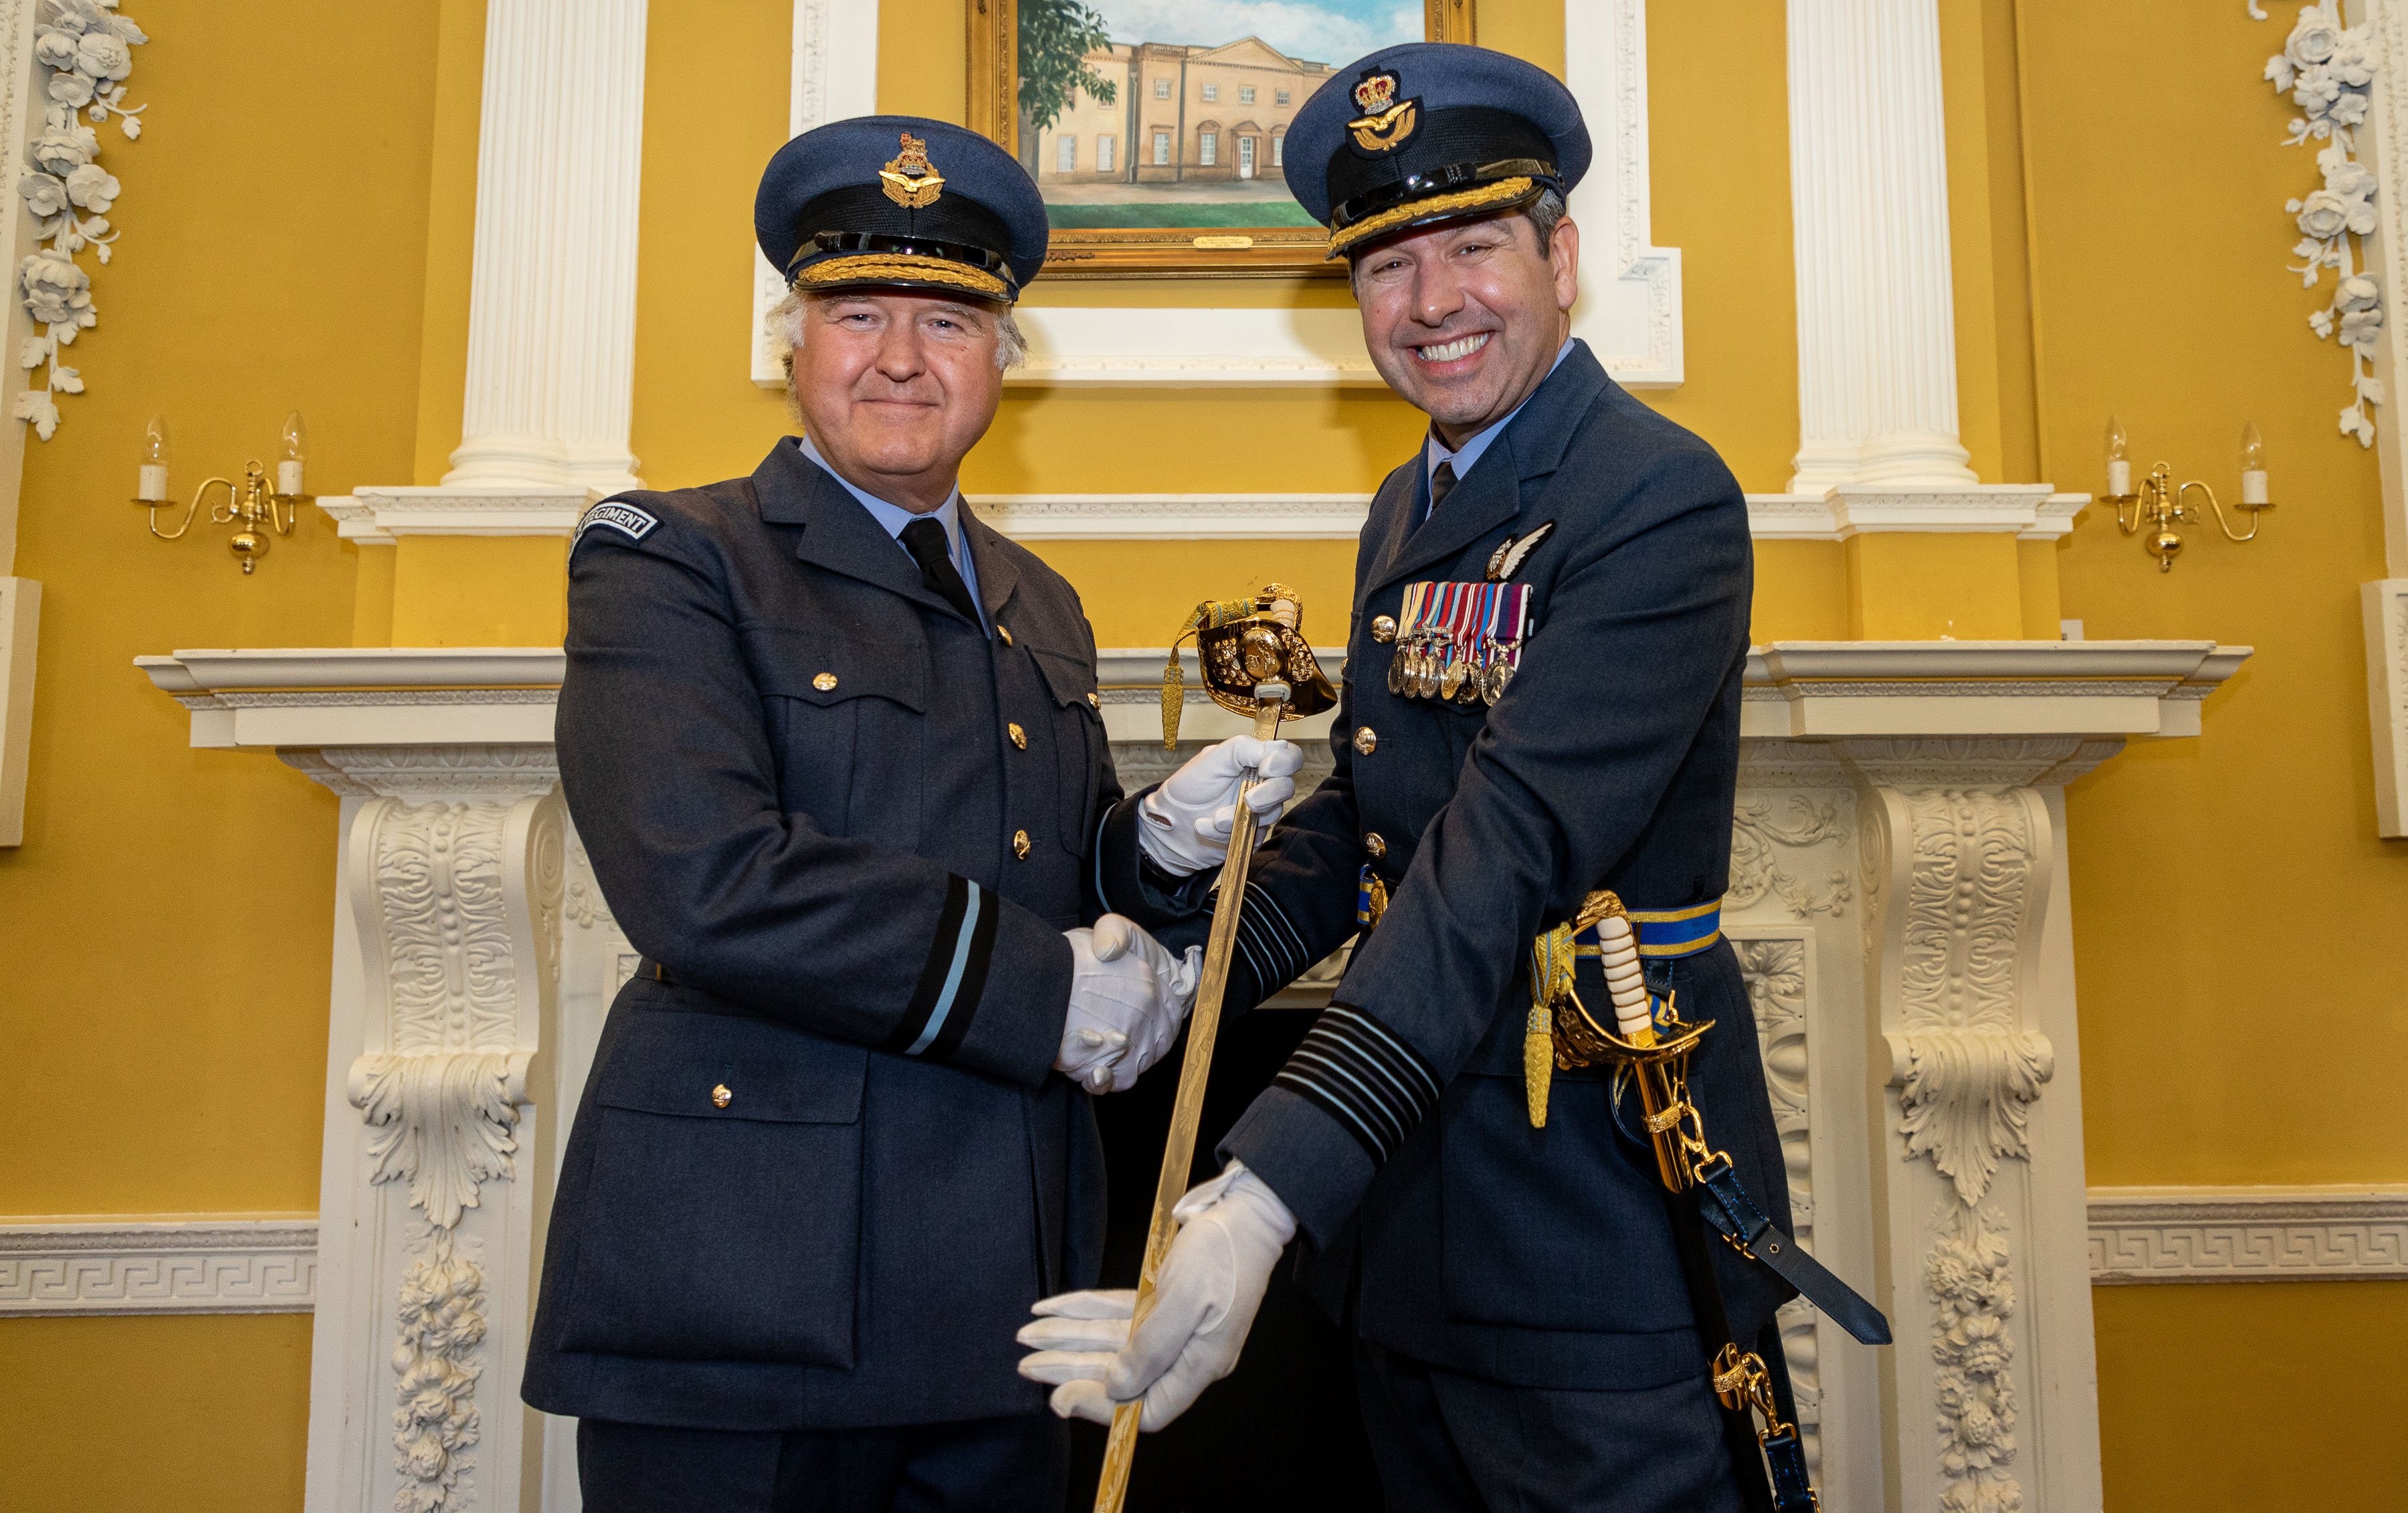 Image shows RAF aviators holding the Firmin Sword.